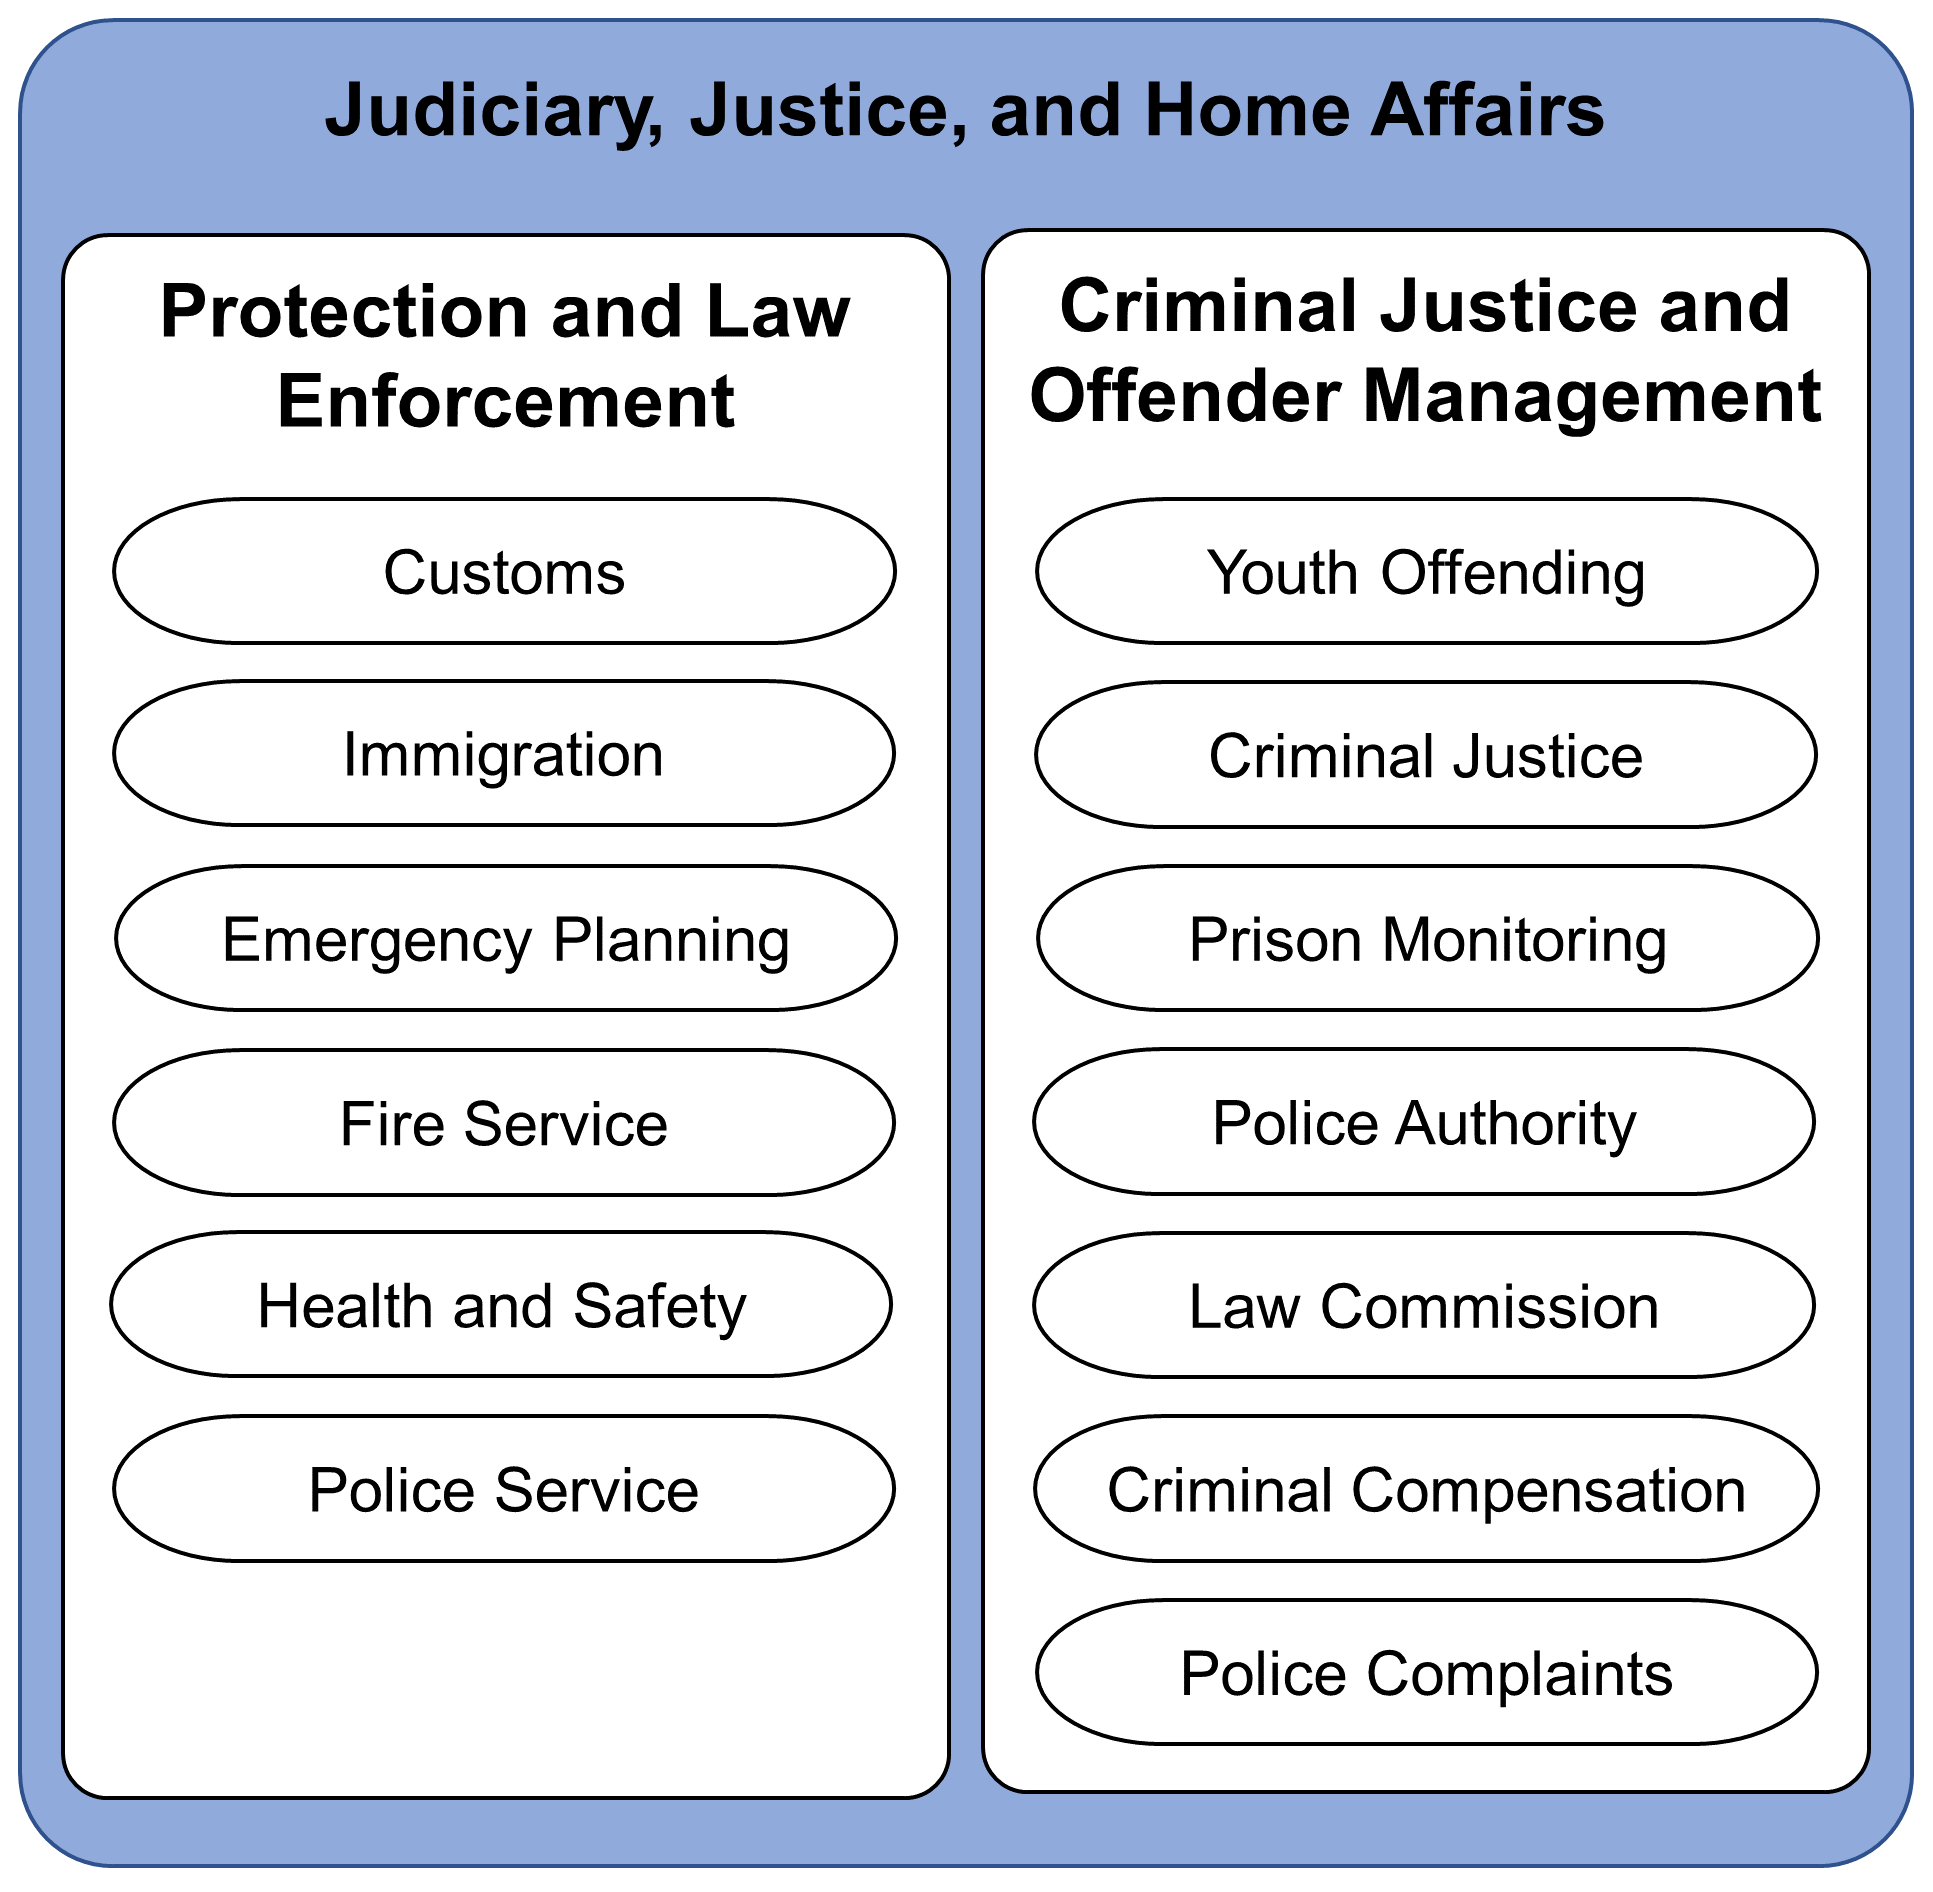 Elements of Judiciary Justice and Home Affairs Sector